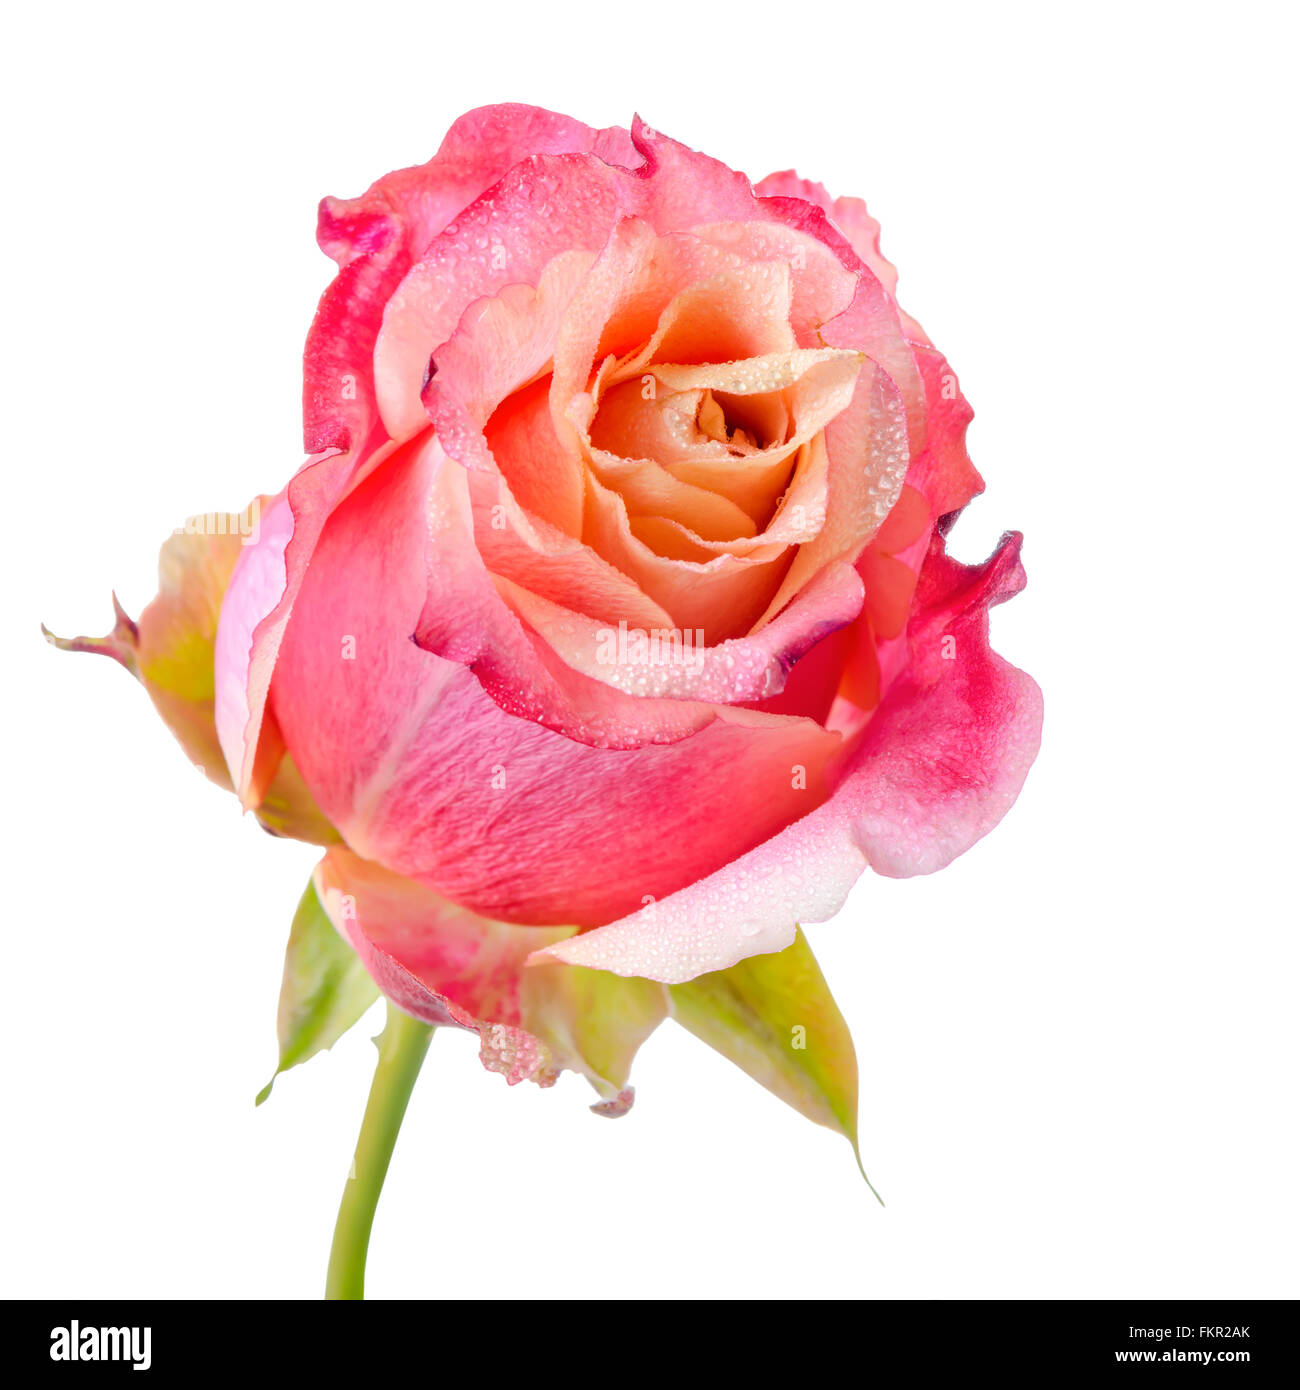 close up of abstract romantic beautiful pink and orange rose flower with dew is isolated on white background Stock Photo